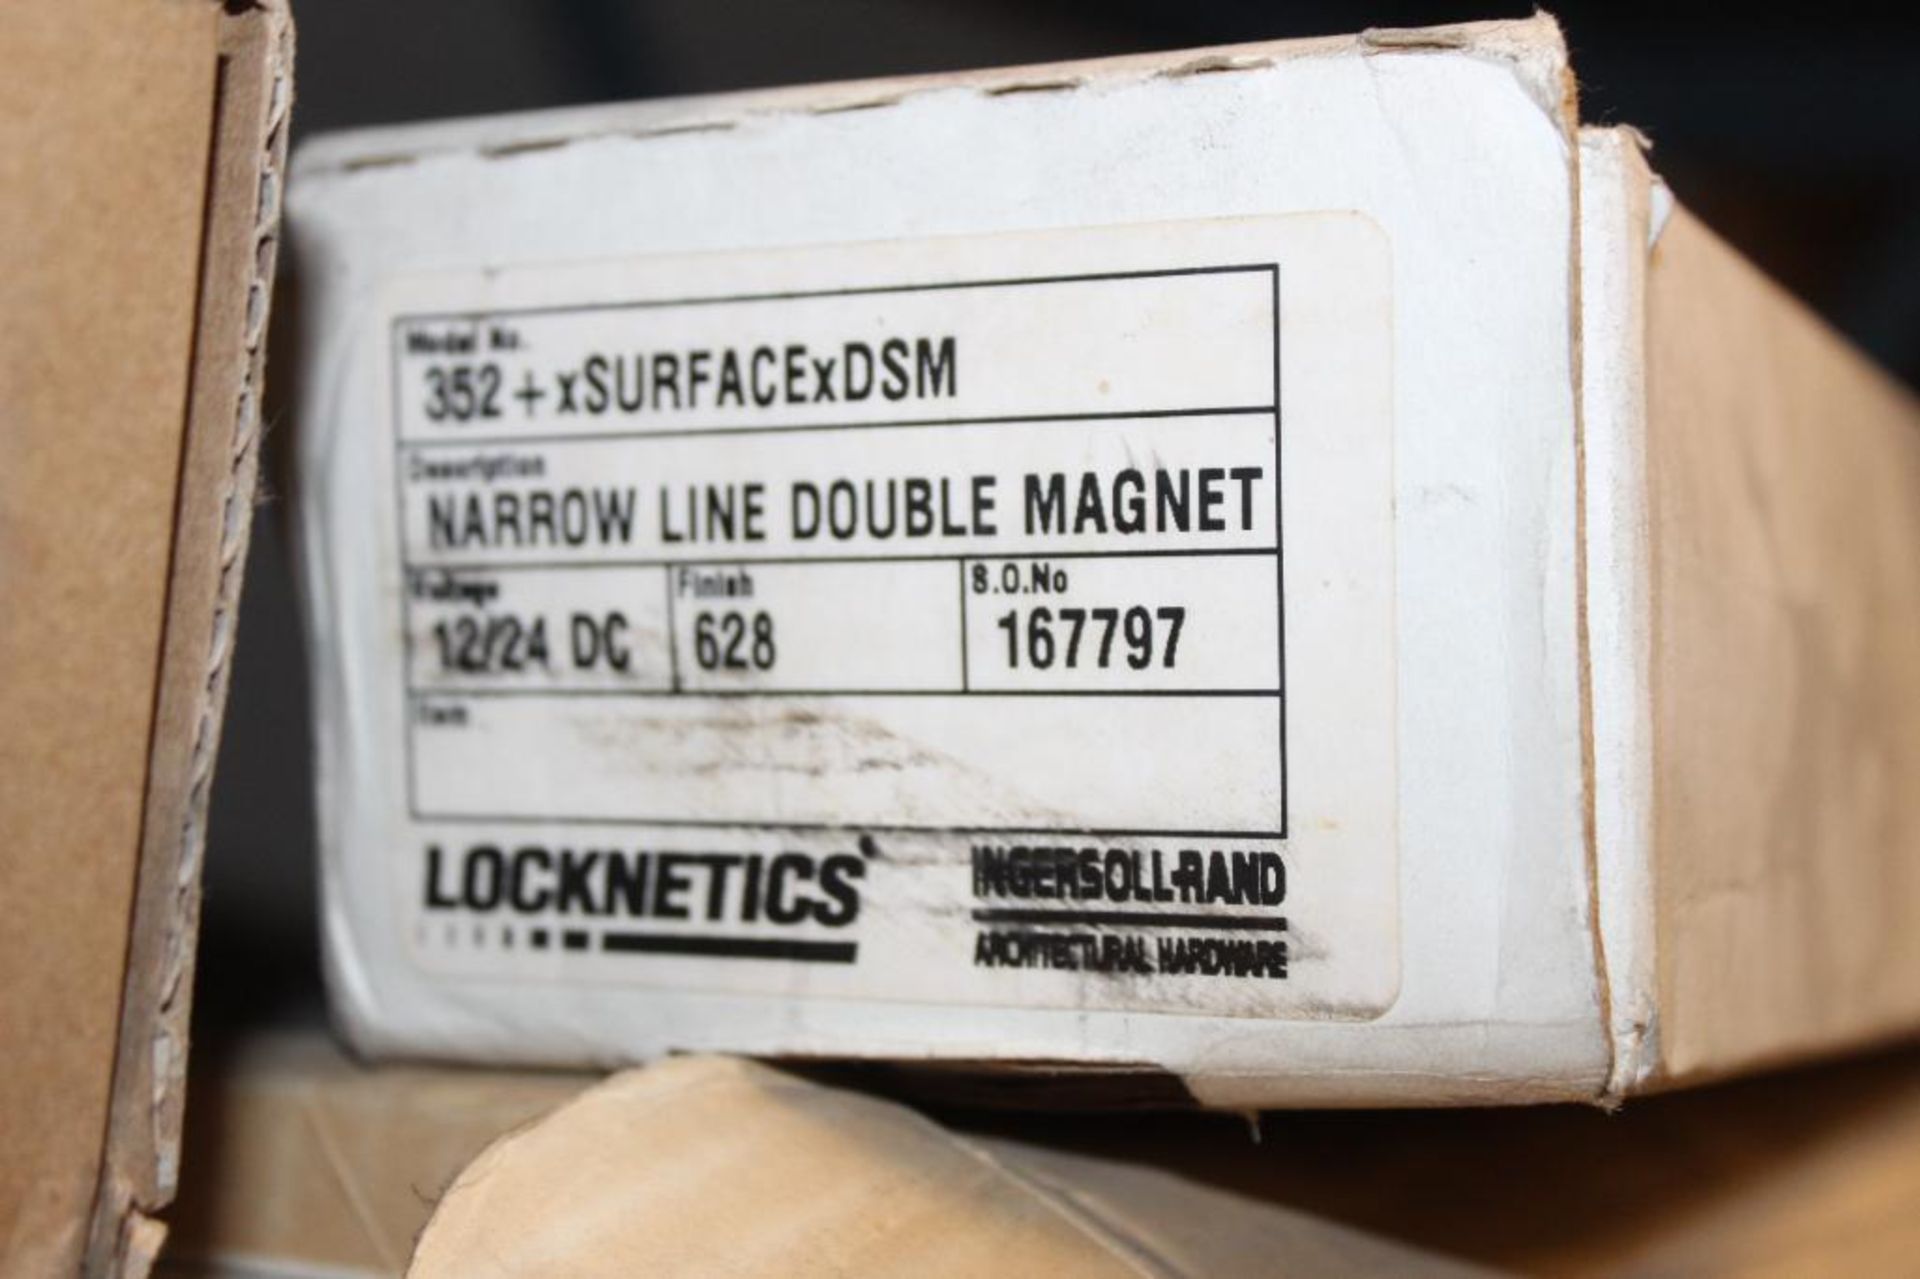 Lot of Locknetics, Schlage, Emlock and Assa Abloy Electromagnetic Locks and Magnets - Image 9 of 13